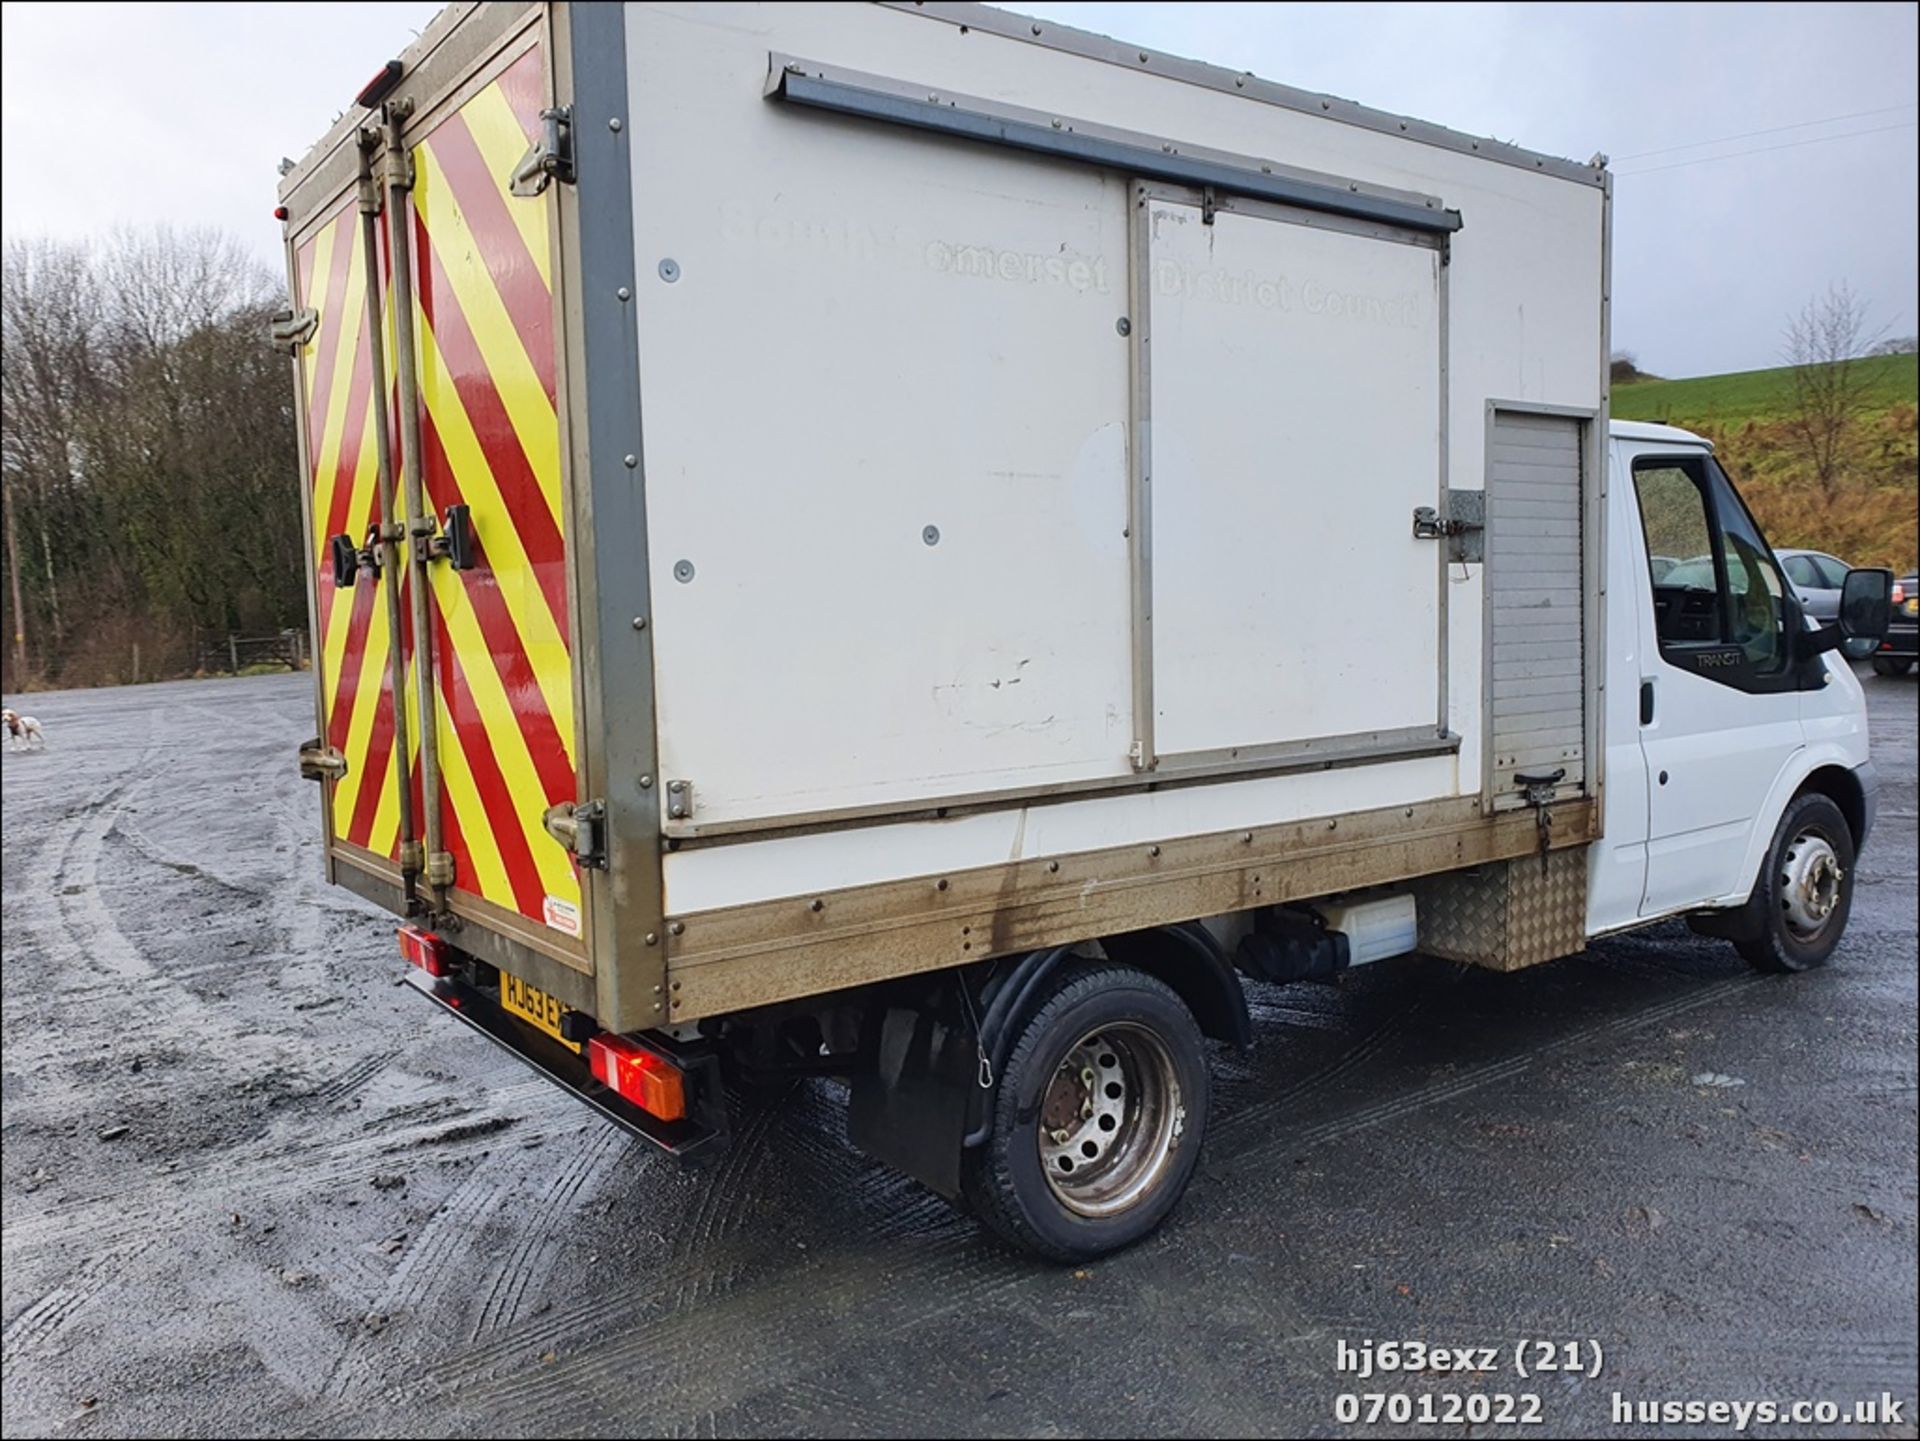 13/63 FORD TRANSIT 100 T350 RWD - 2198cc 3dr Tipper (White, 72k) - Image 24 of 30